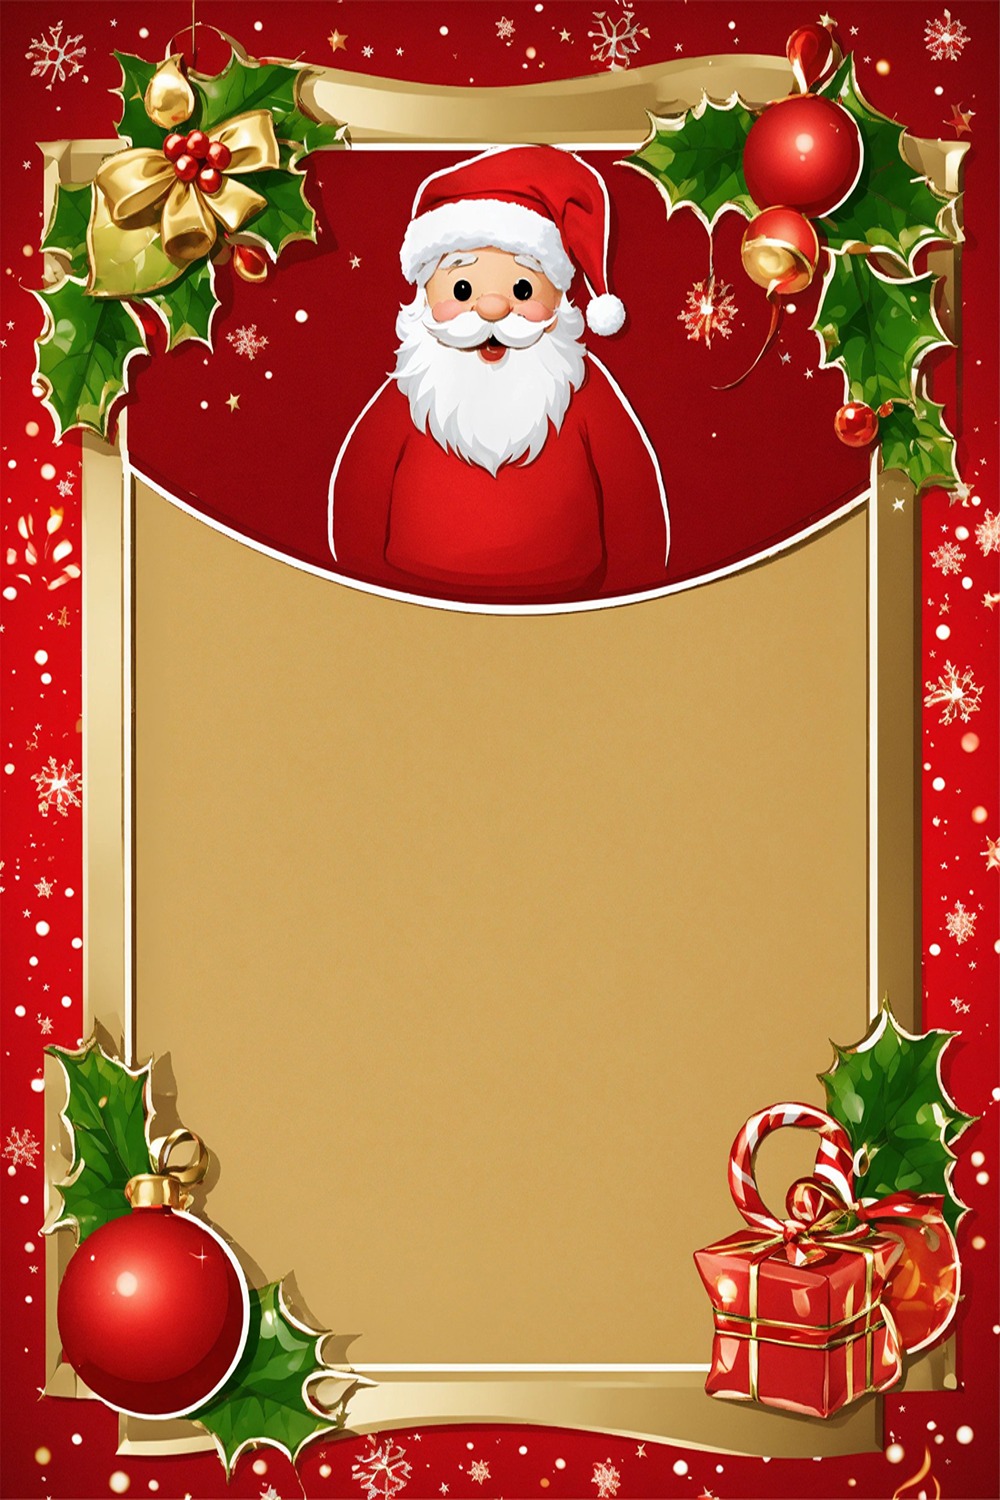 Merry Christmas - Background Invitation Card Design Template Total = 08 pinterest preview image.